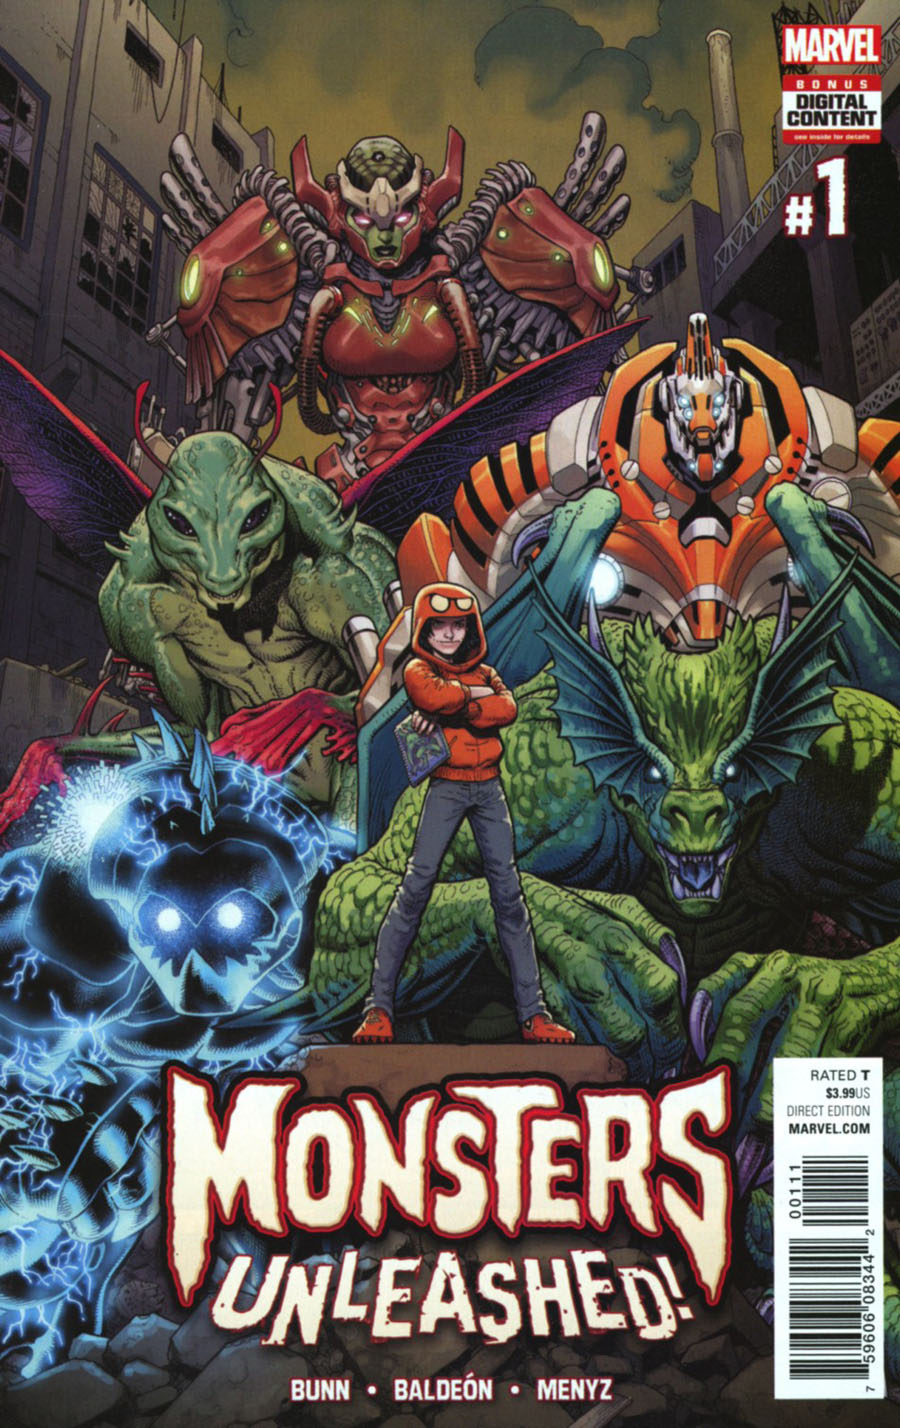 Monsters Unleashed Vol 2 #1 Cover A Regular Arthur Adams Cover